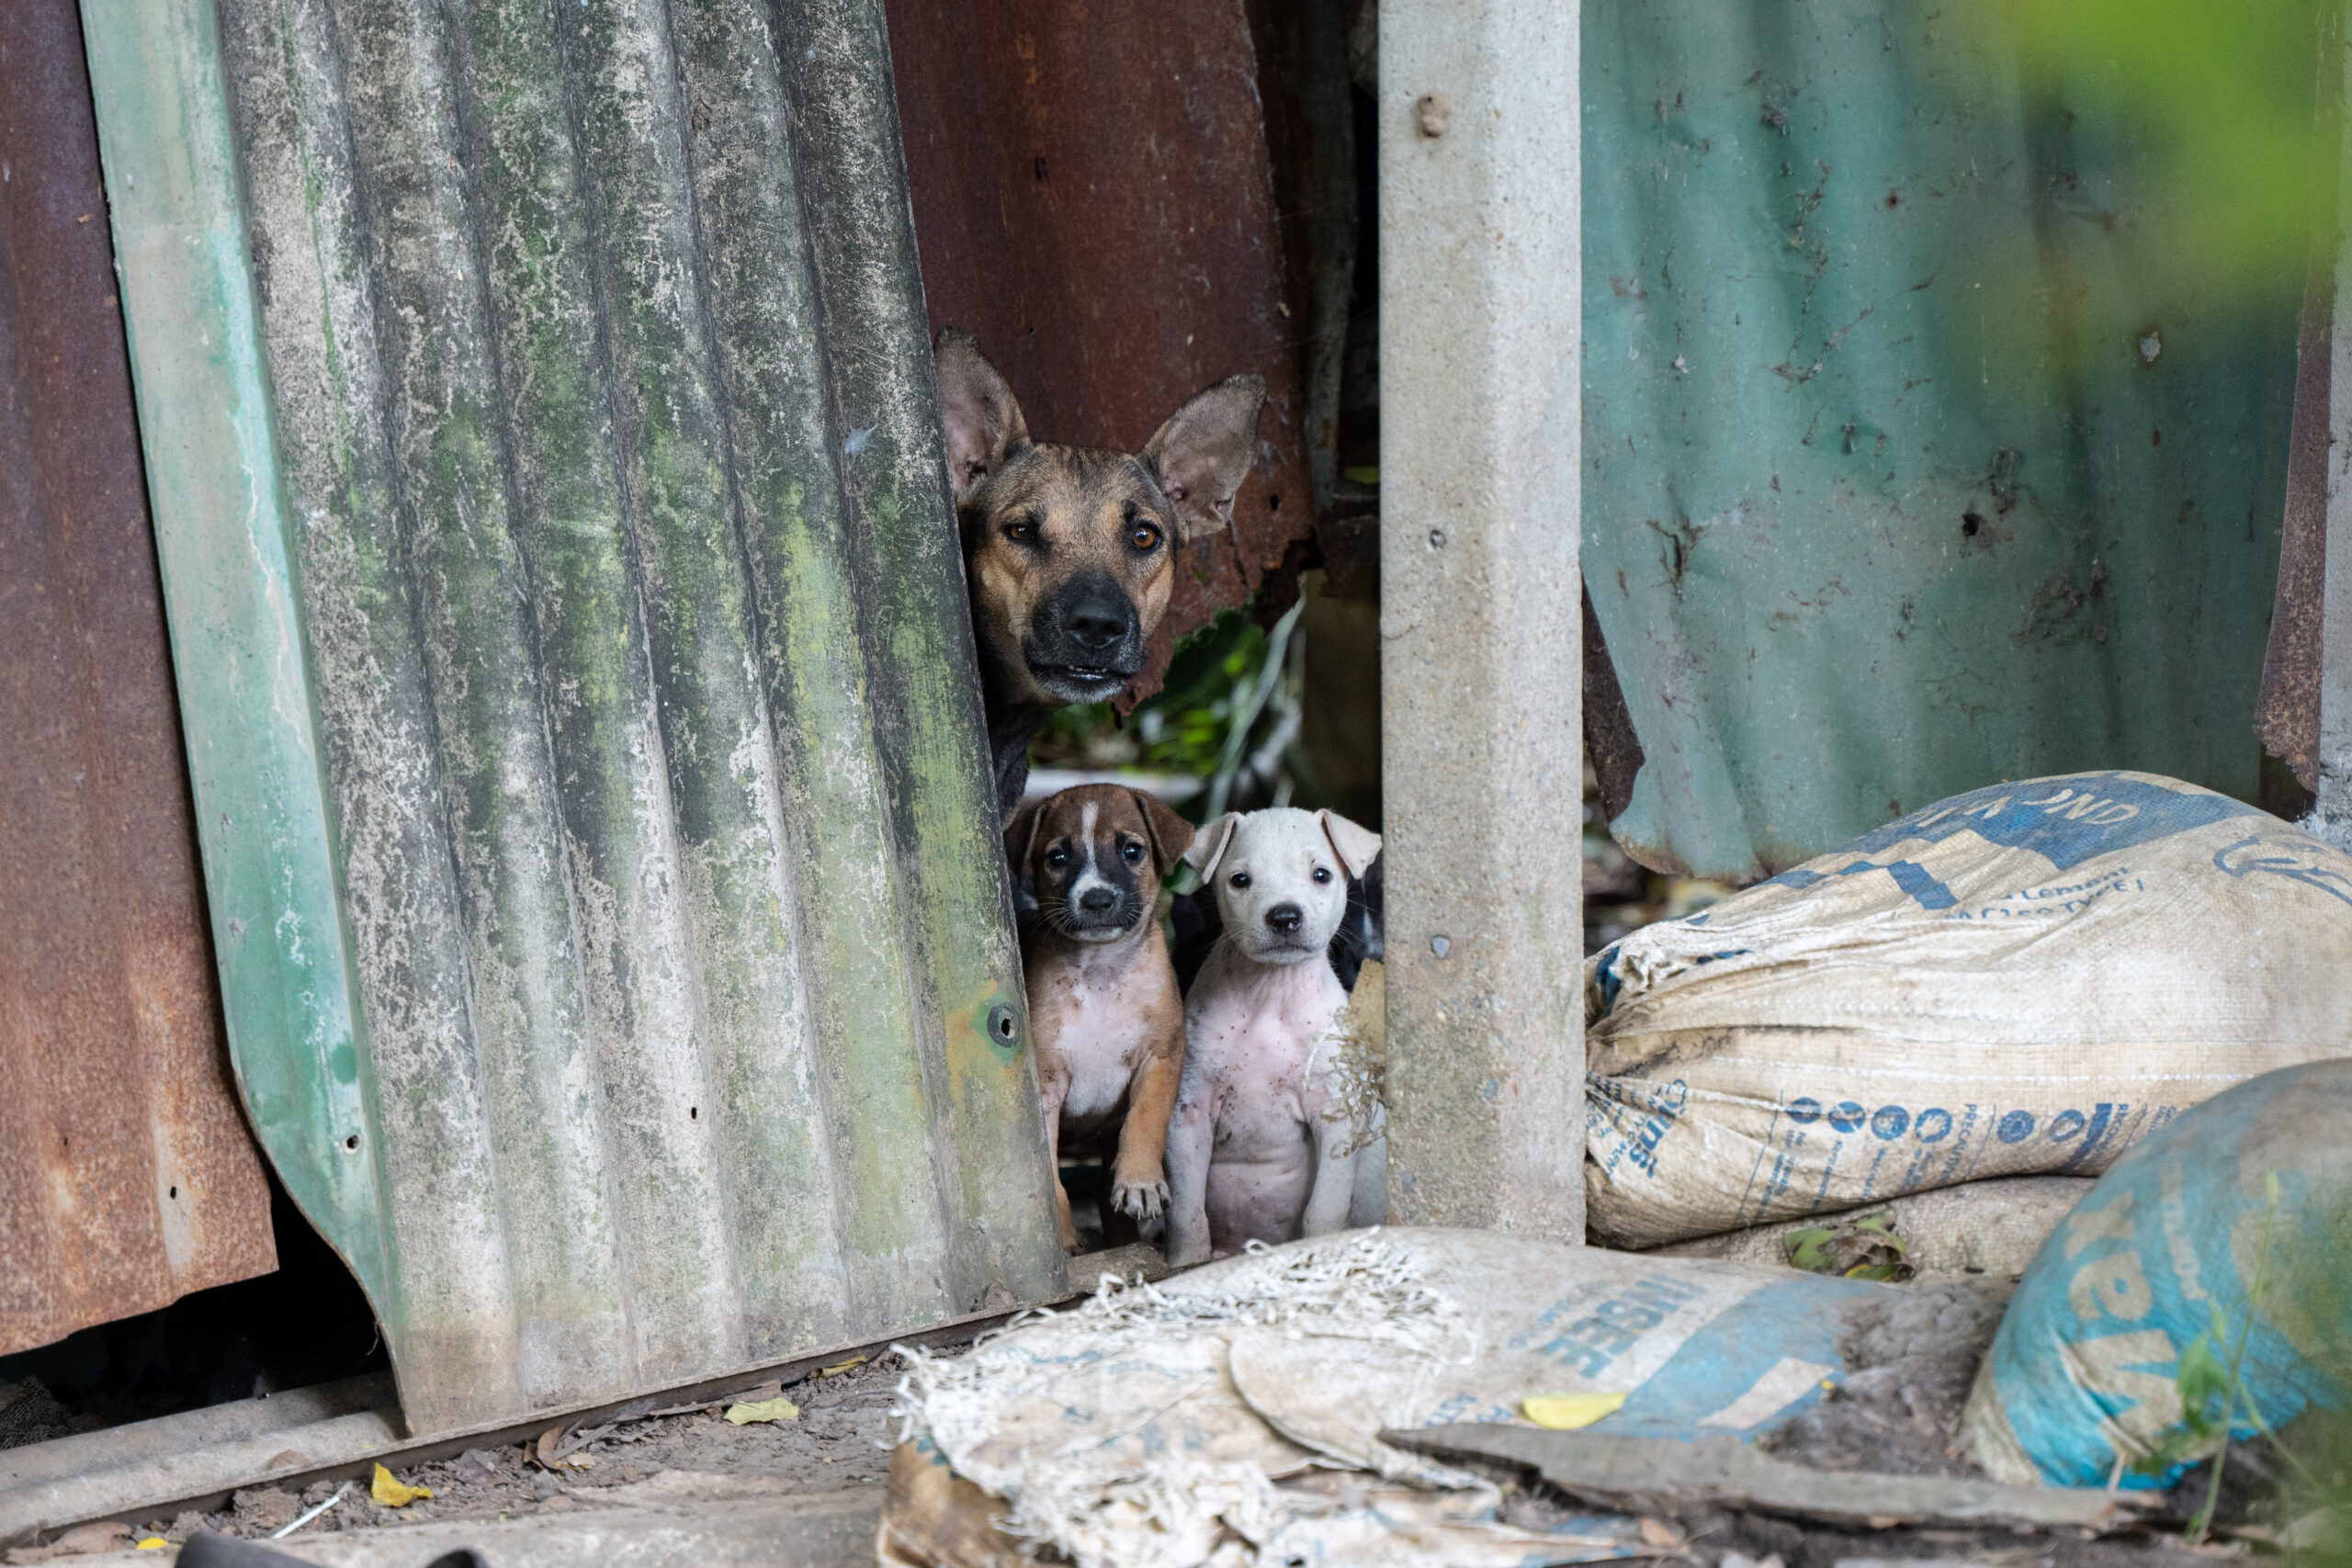 Bangkok is home to a large population of stray animals.